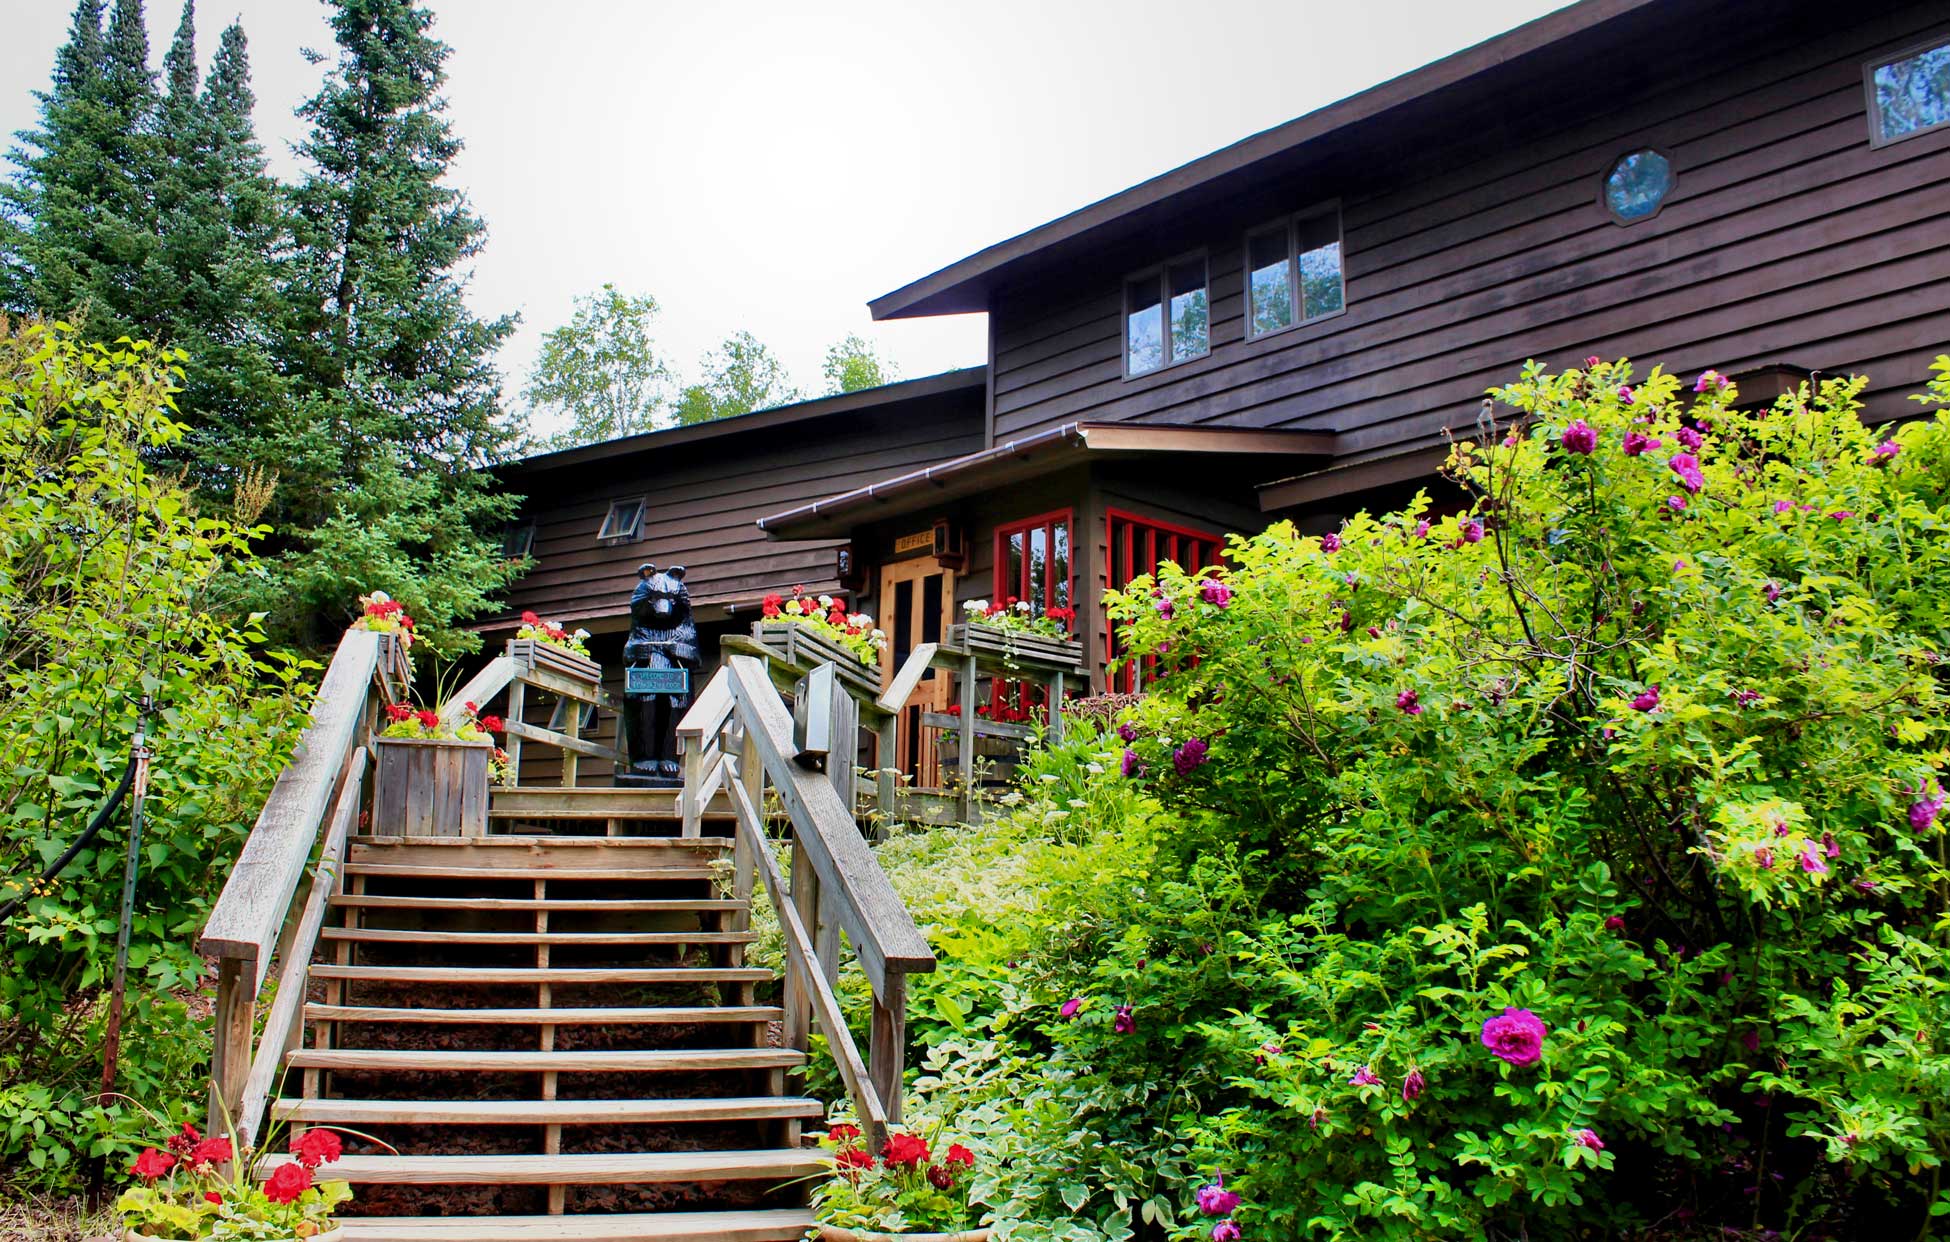 Front photo of Bearskin Lodge in the summer with flowers